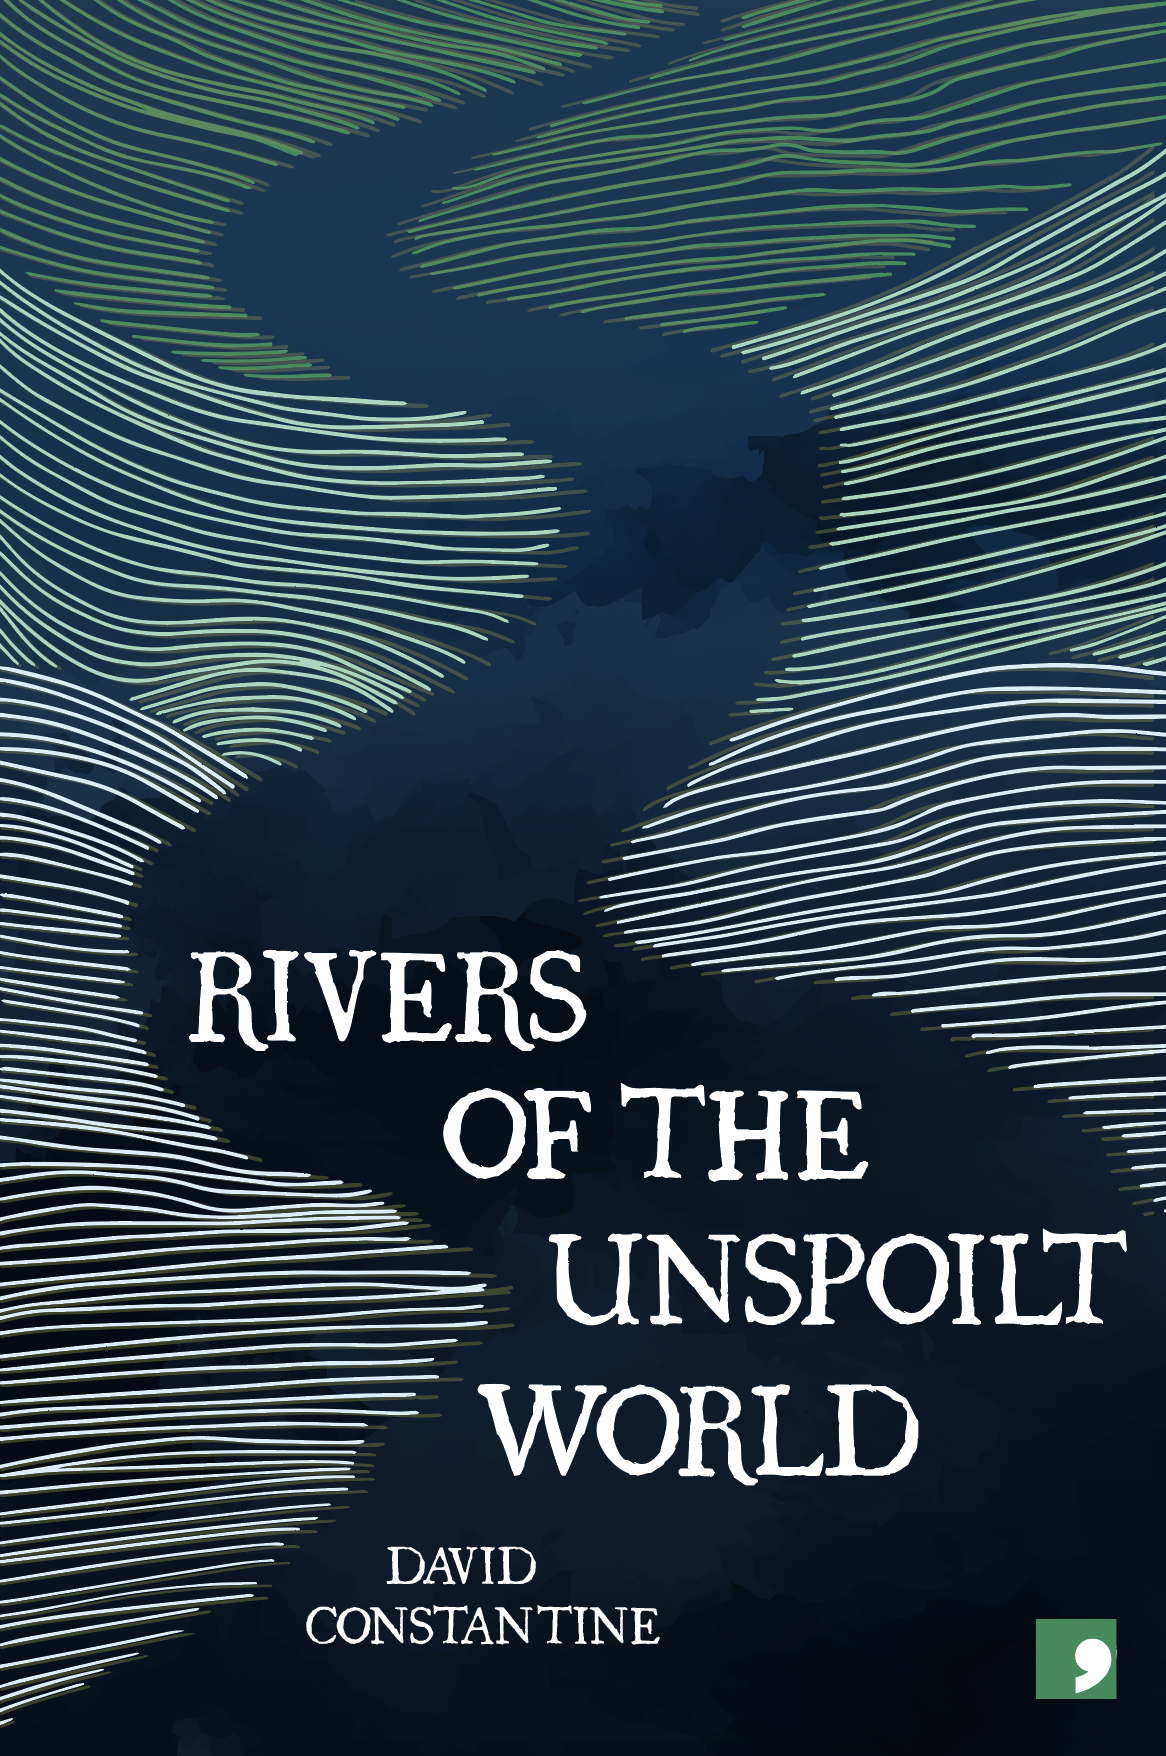 Rivers of the Unspoilt World book cover